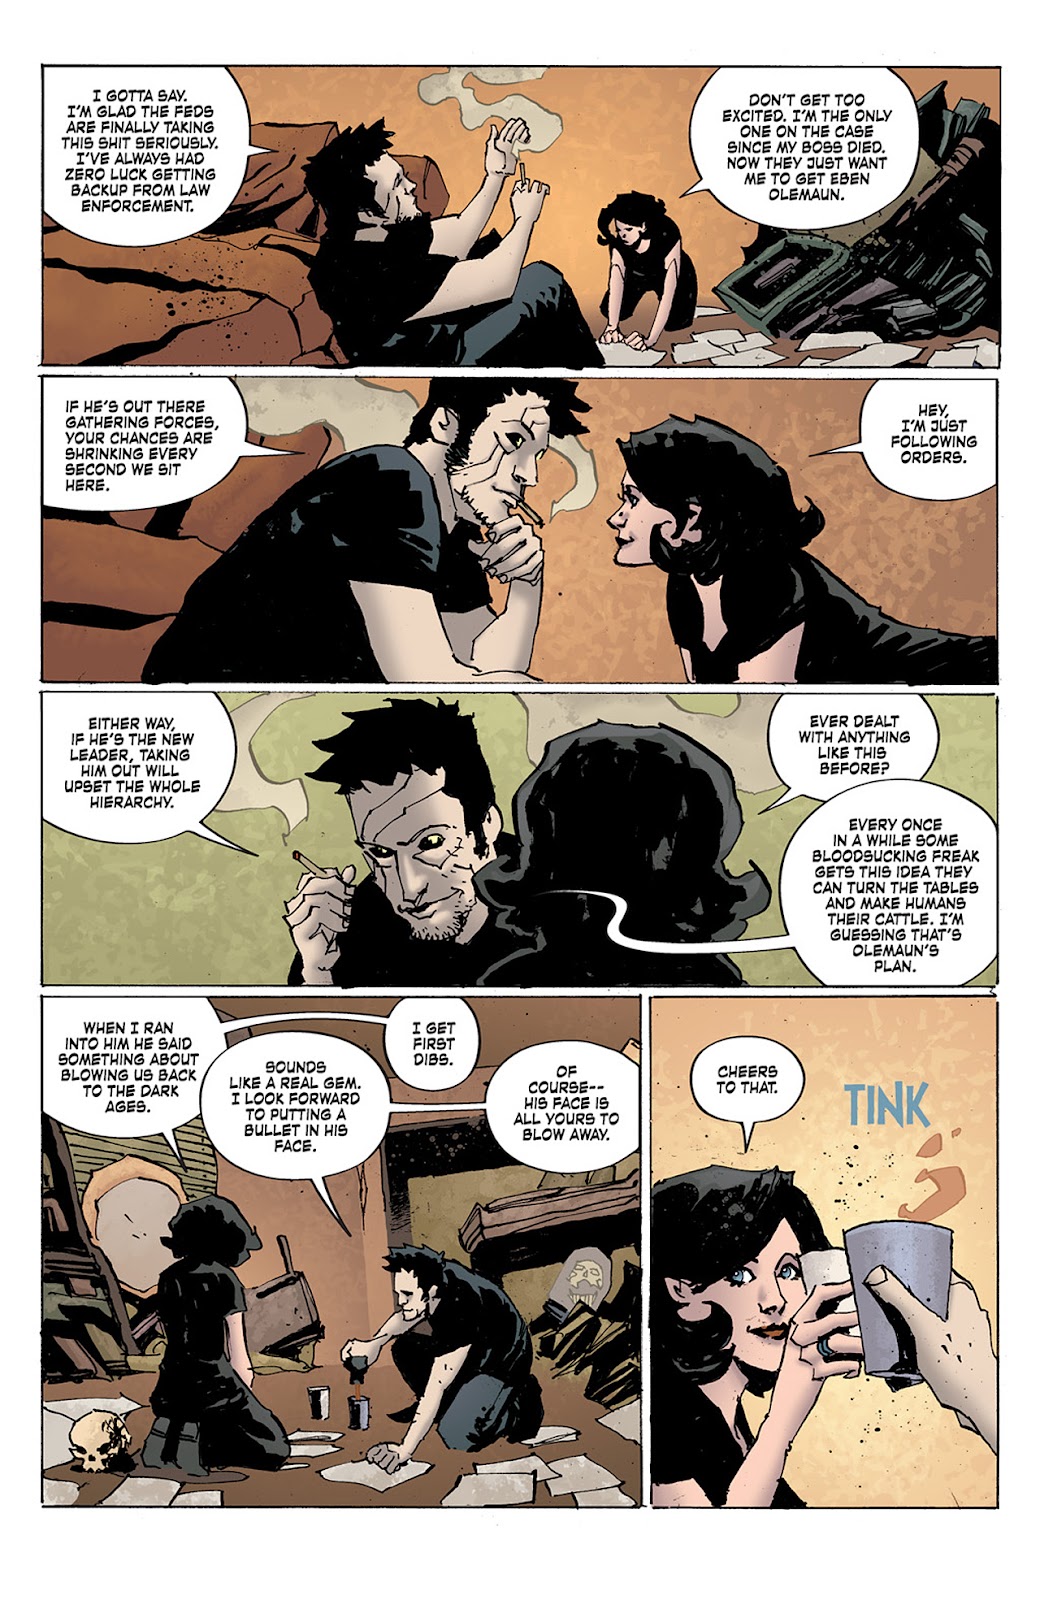 Criminal Macabre: Final Night - The 30 Days of Night Crossover issue 2 - Page 6